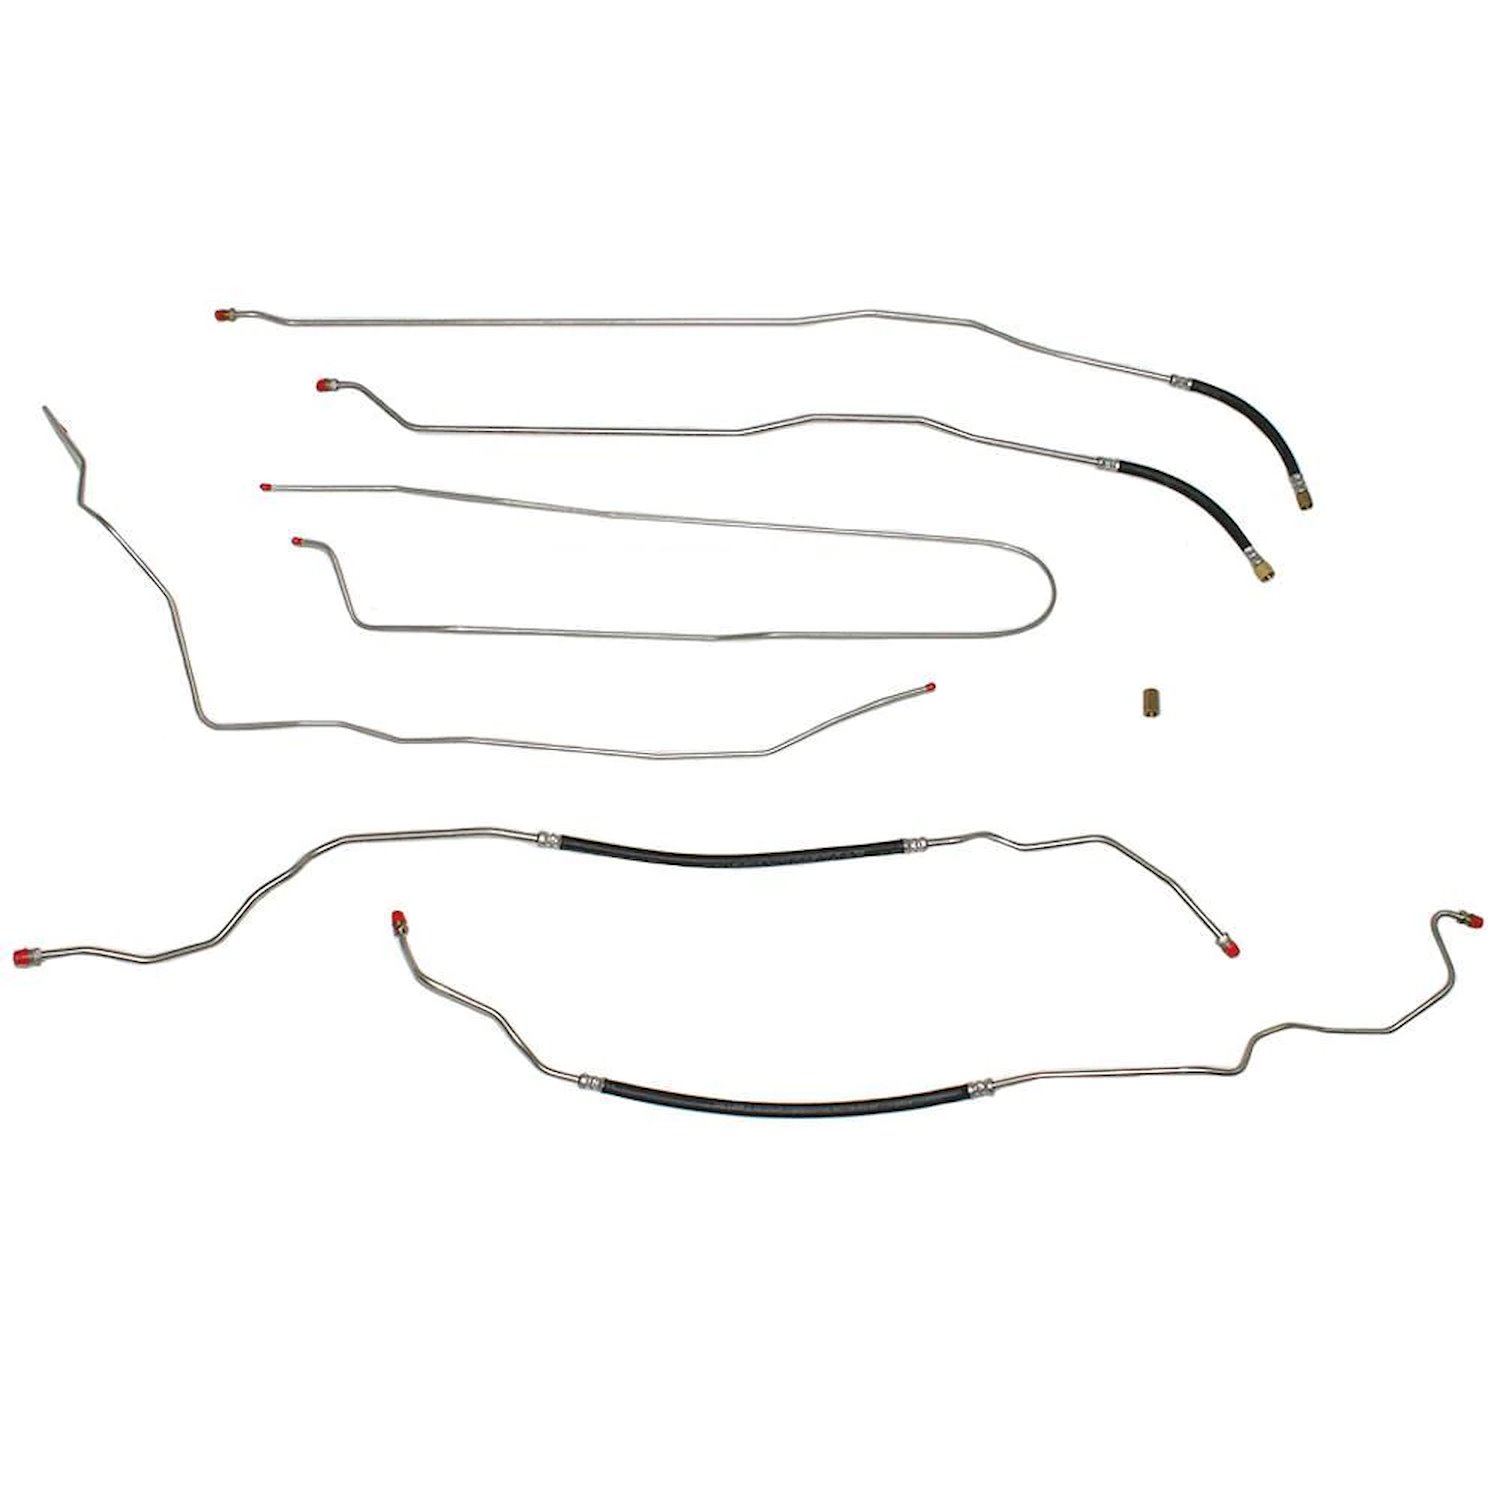 Complete Fuel Line Kit for 1996-1999 GMC Yukon 4WD, 4-Door [Stainless Steel]